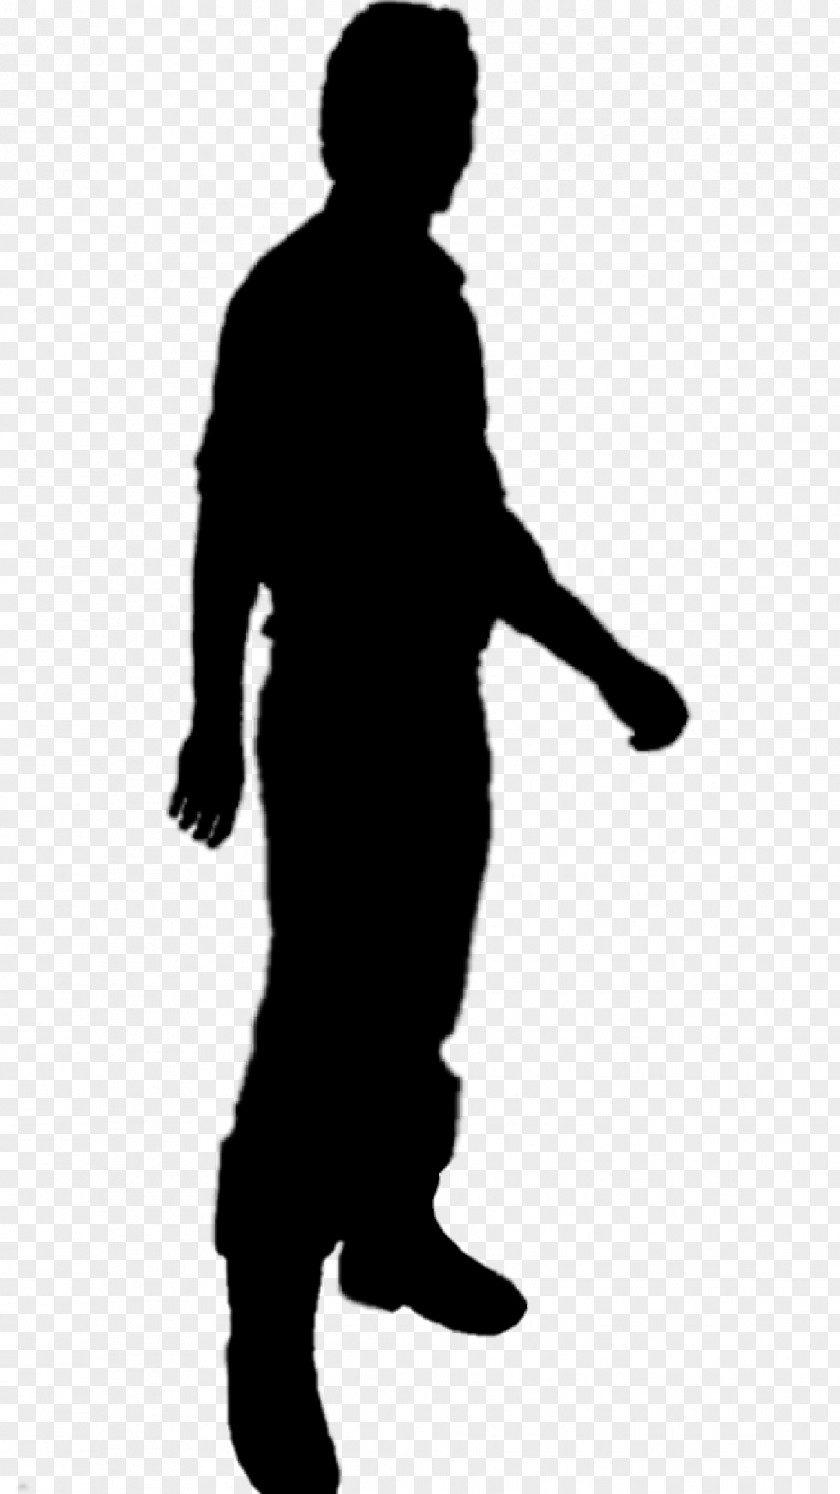 Illustration Silhouette Image Vector Graphics Euclidean PNG